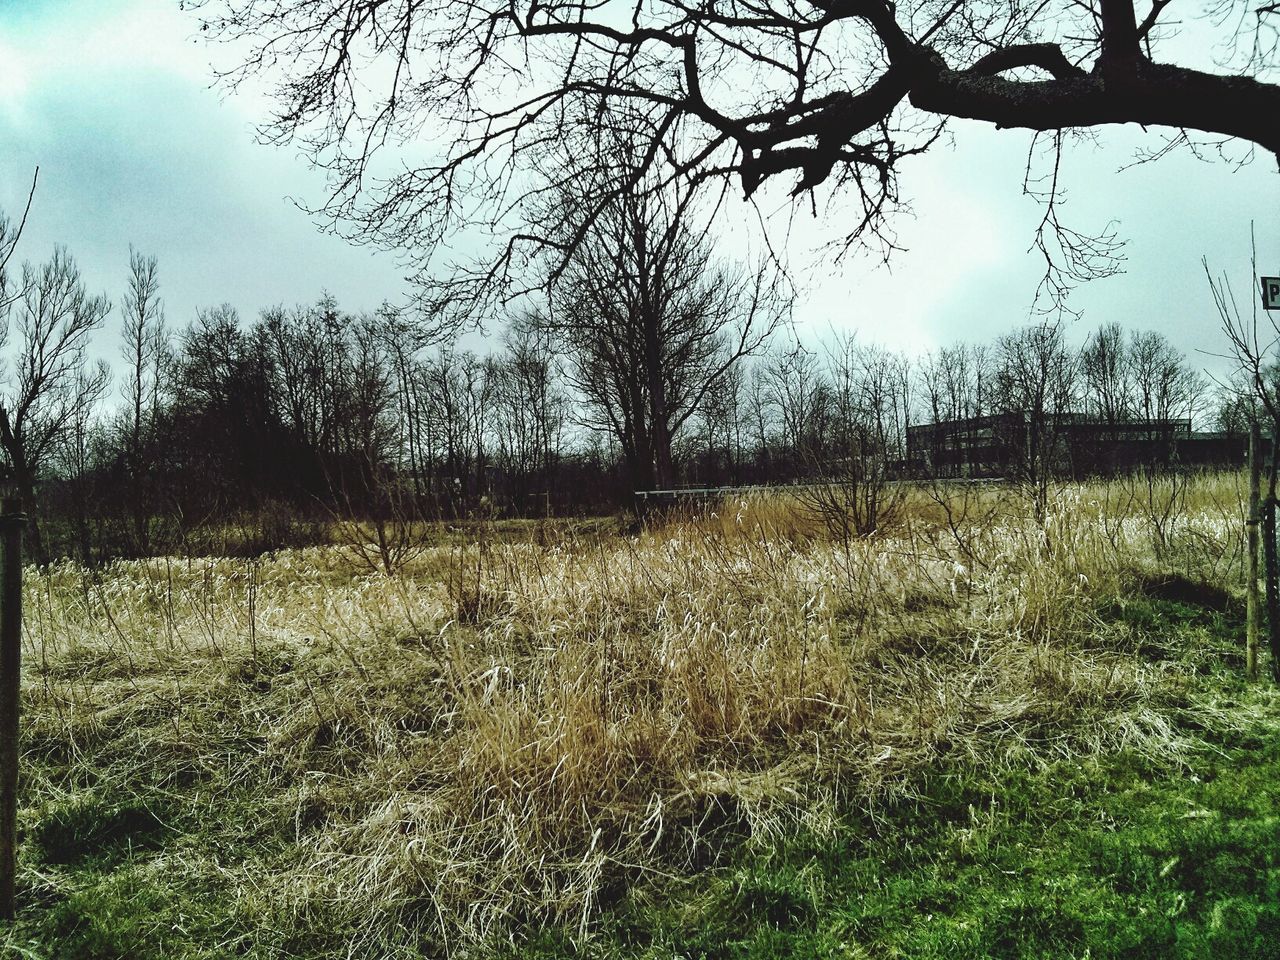 View of dry bushes and bare trees in field